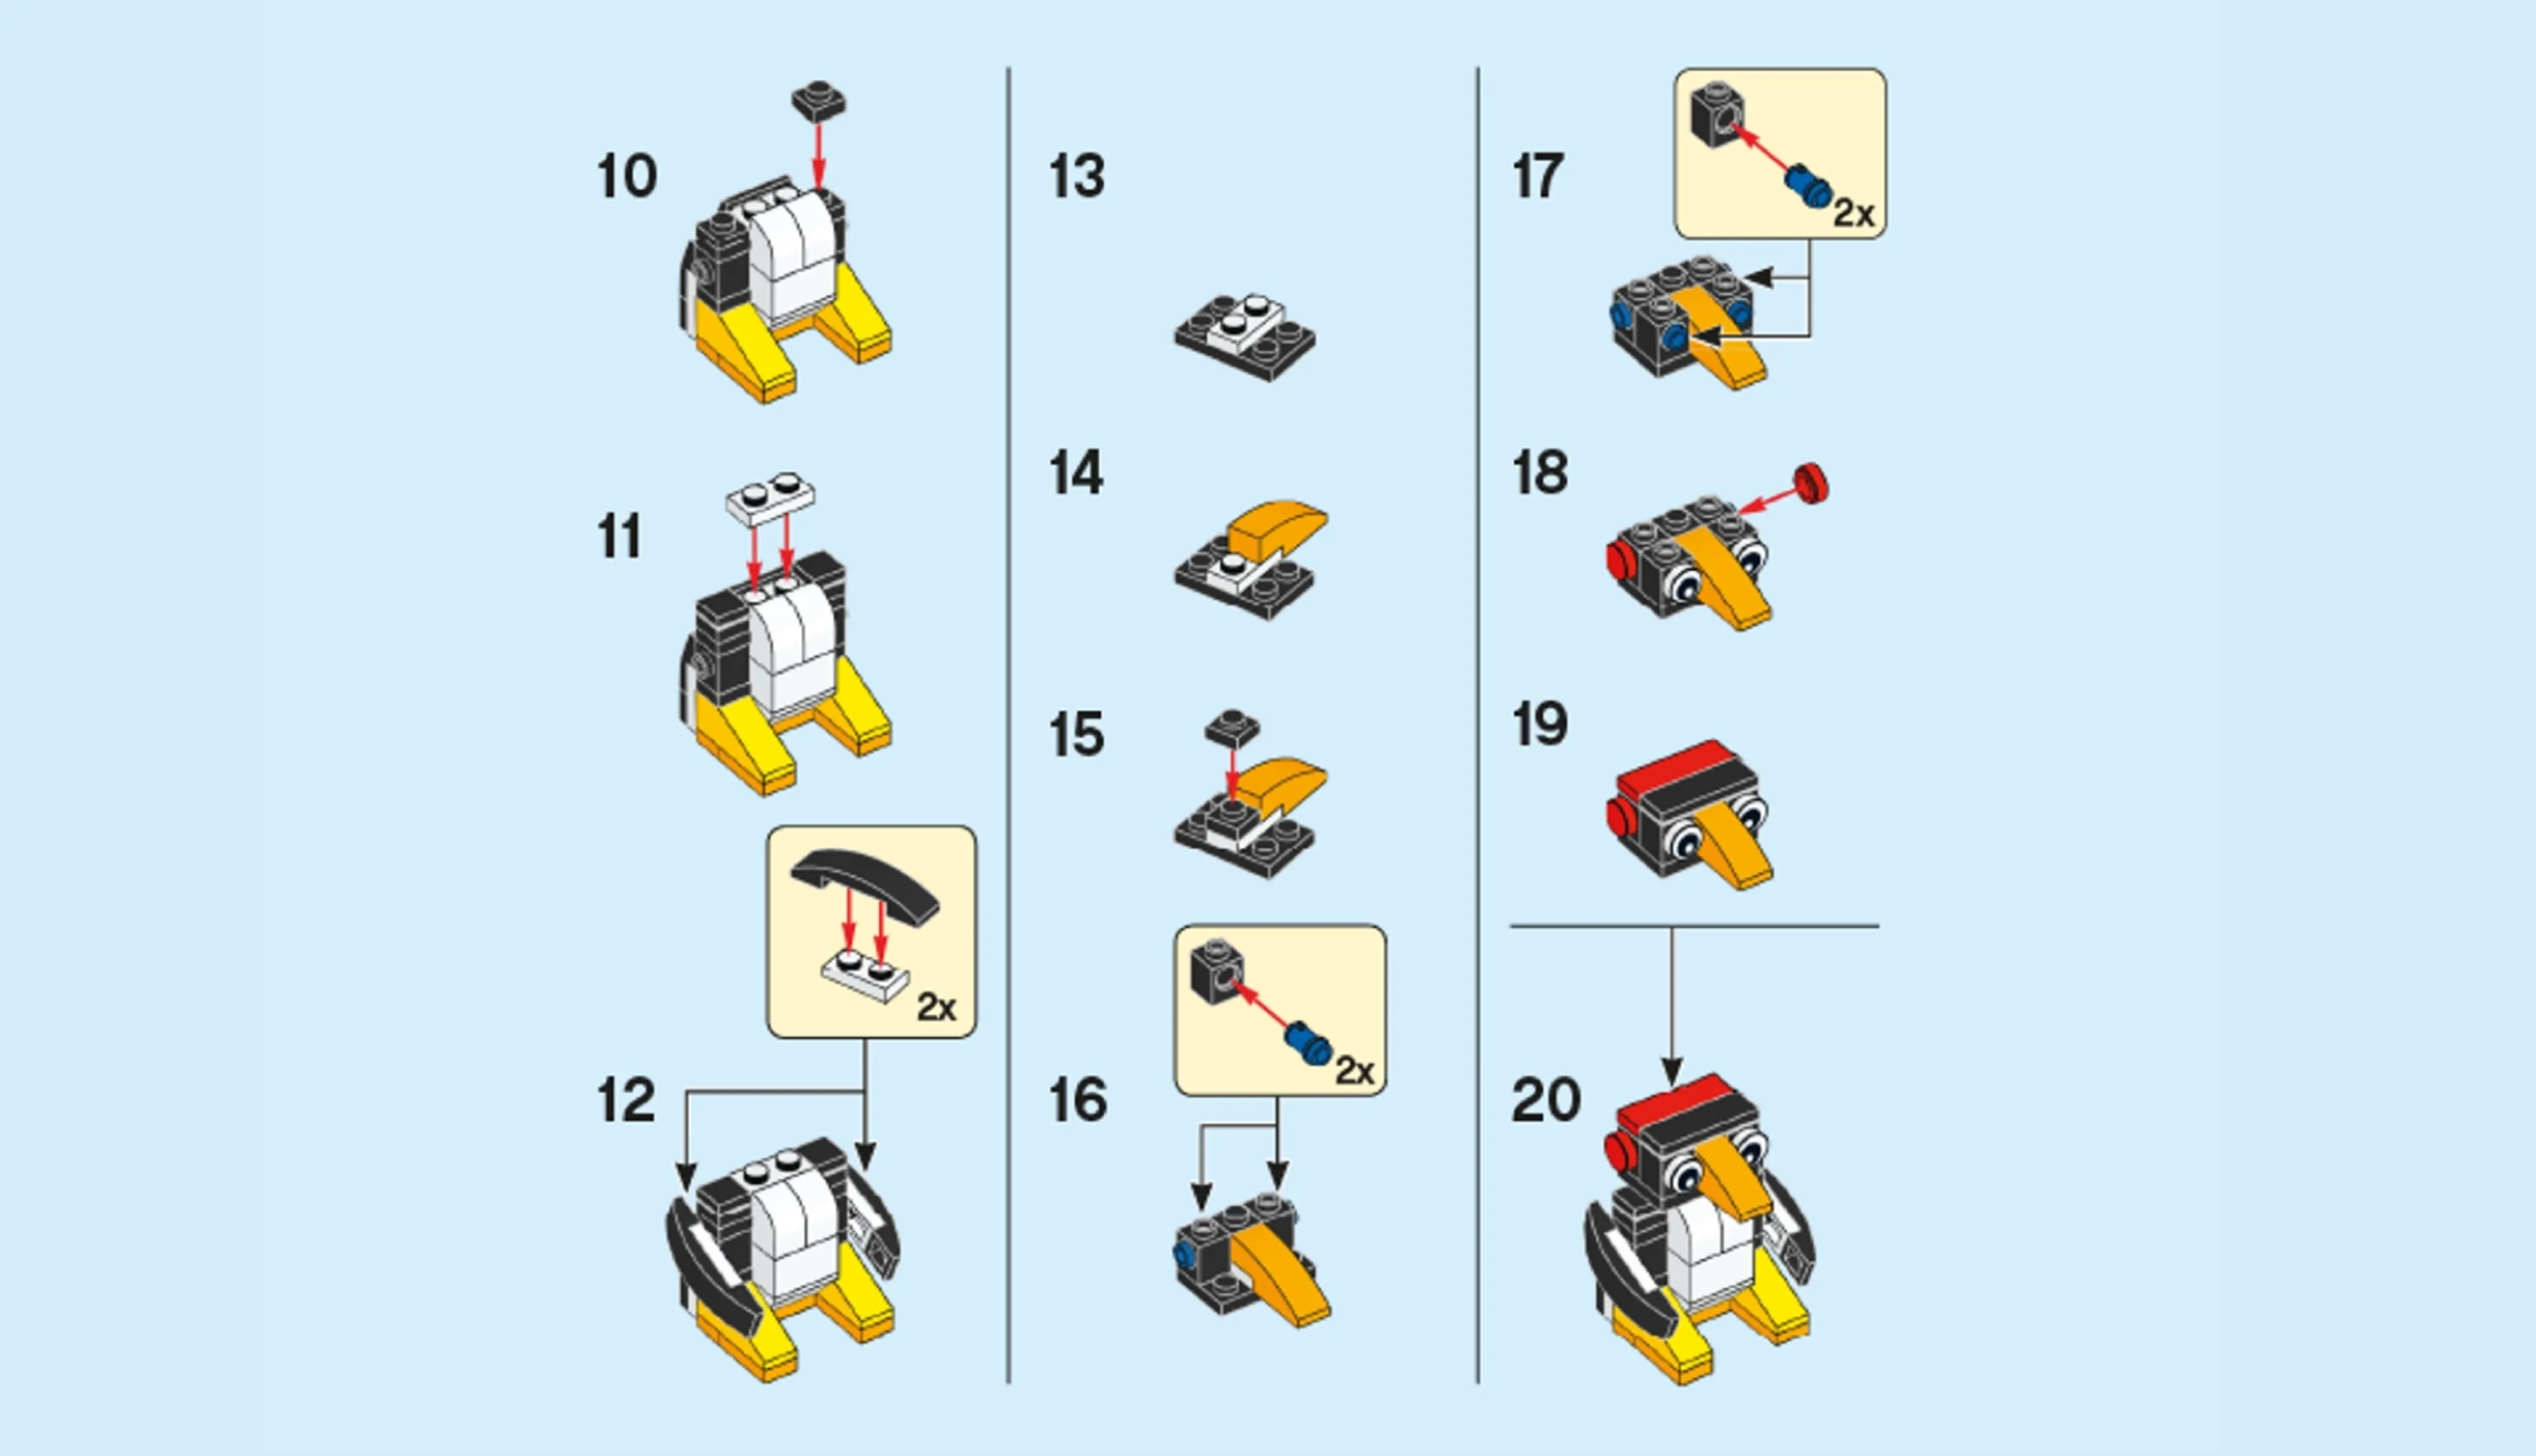 Building instructions for building a LEGO penguin with different steps